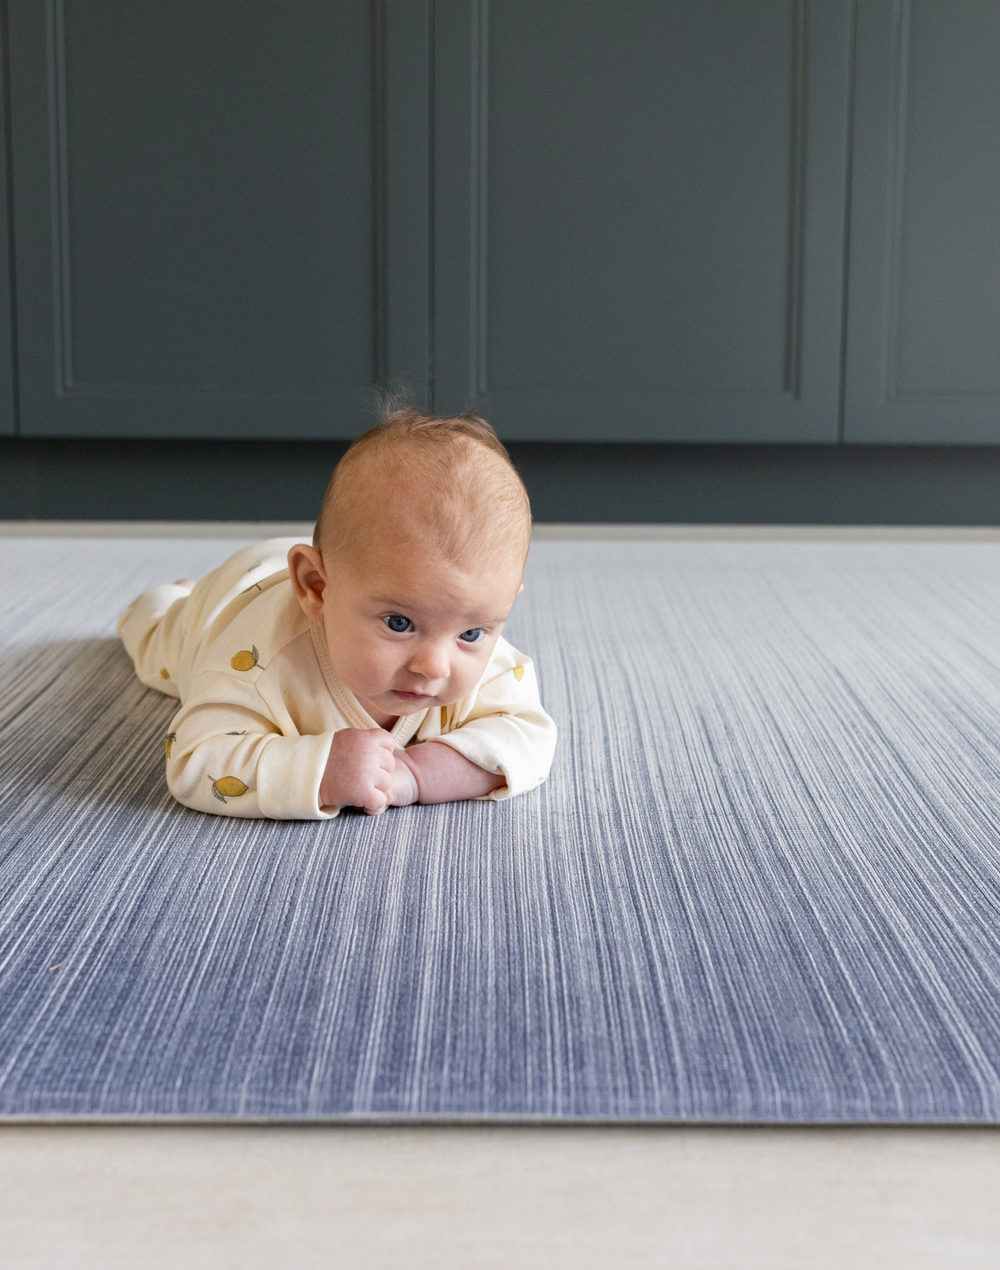 Baby enjoying tummy time on Baby play mats by Totter and Tumble are safe from birth and perfect for tummy time with mouldable memory foam to support little ones building strength 